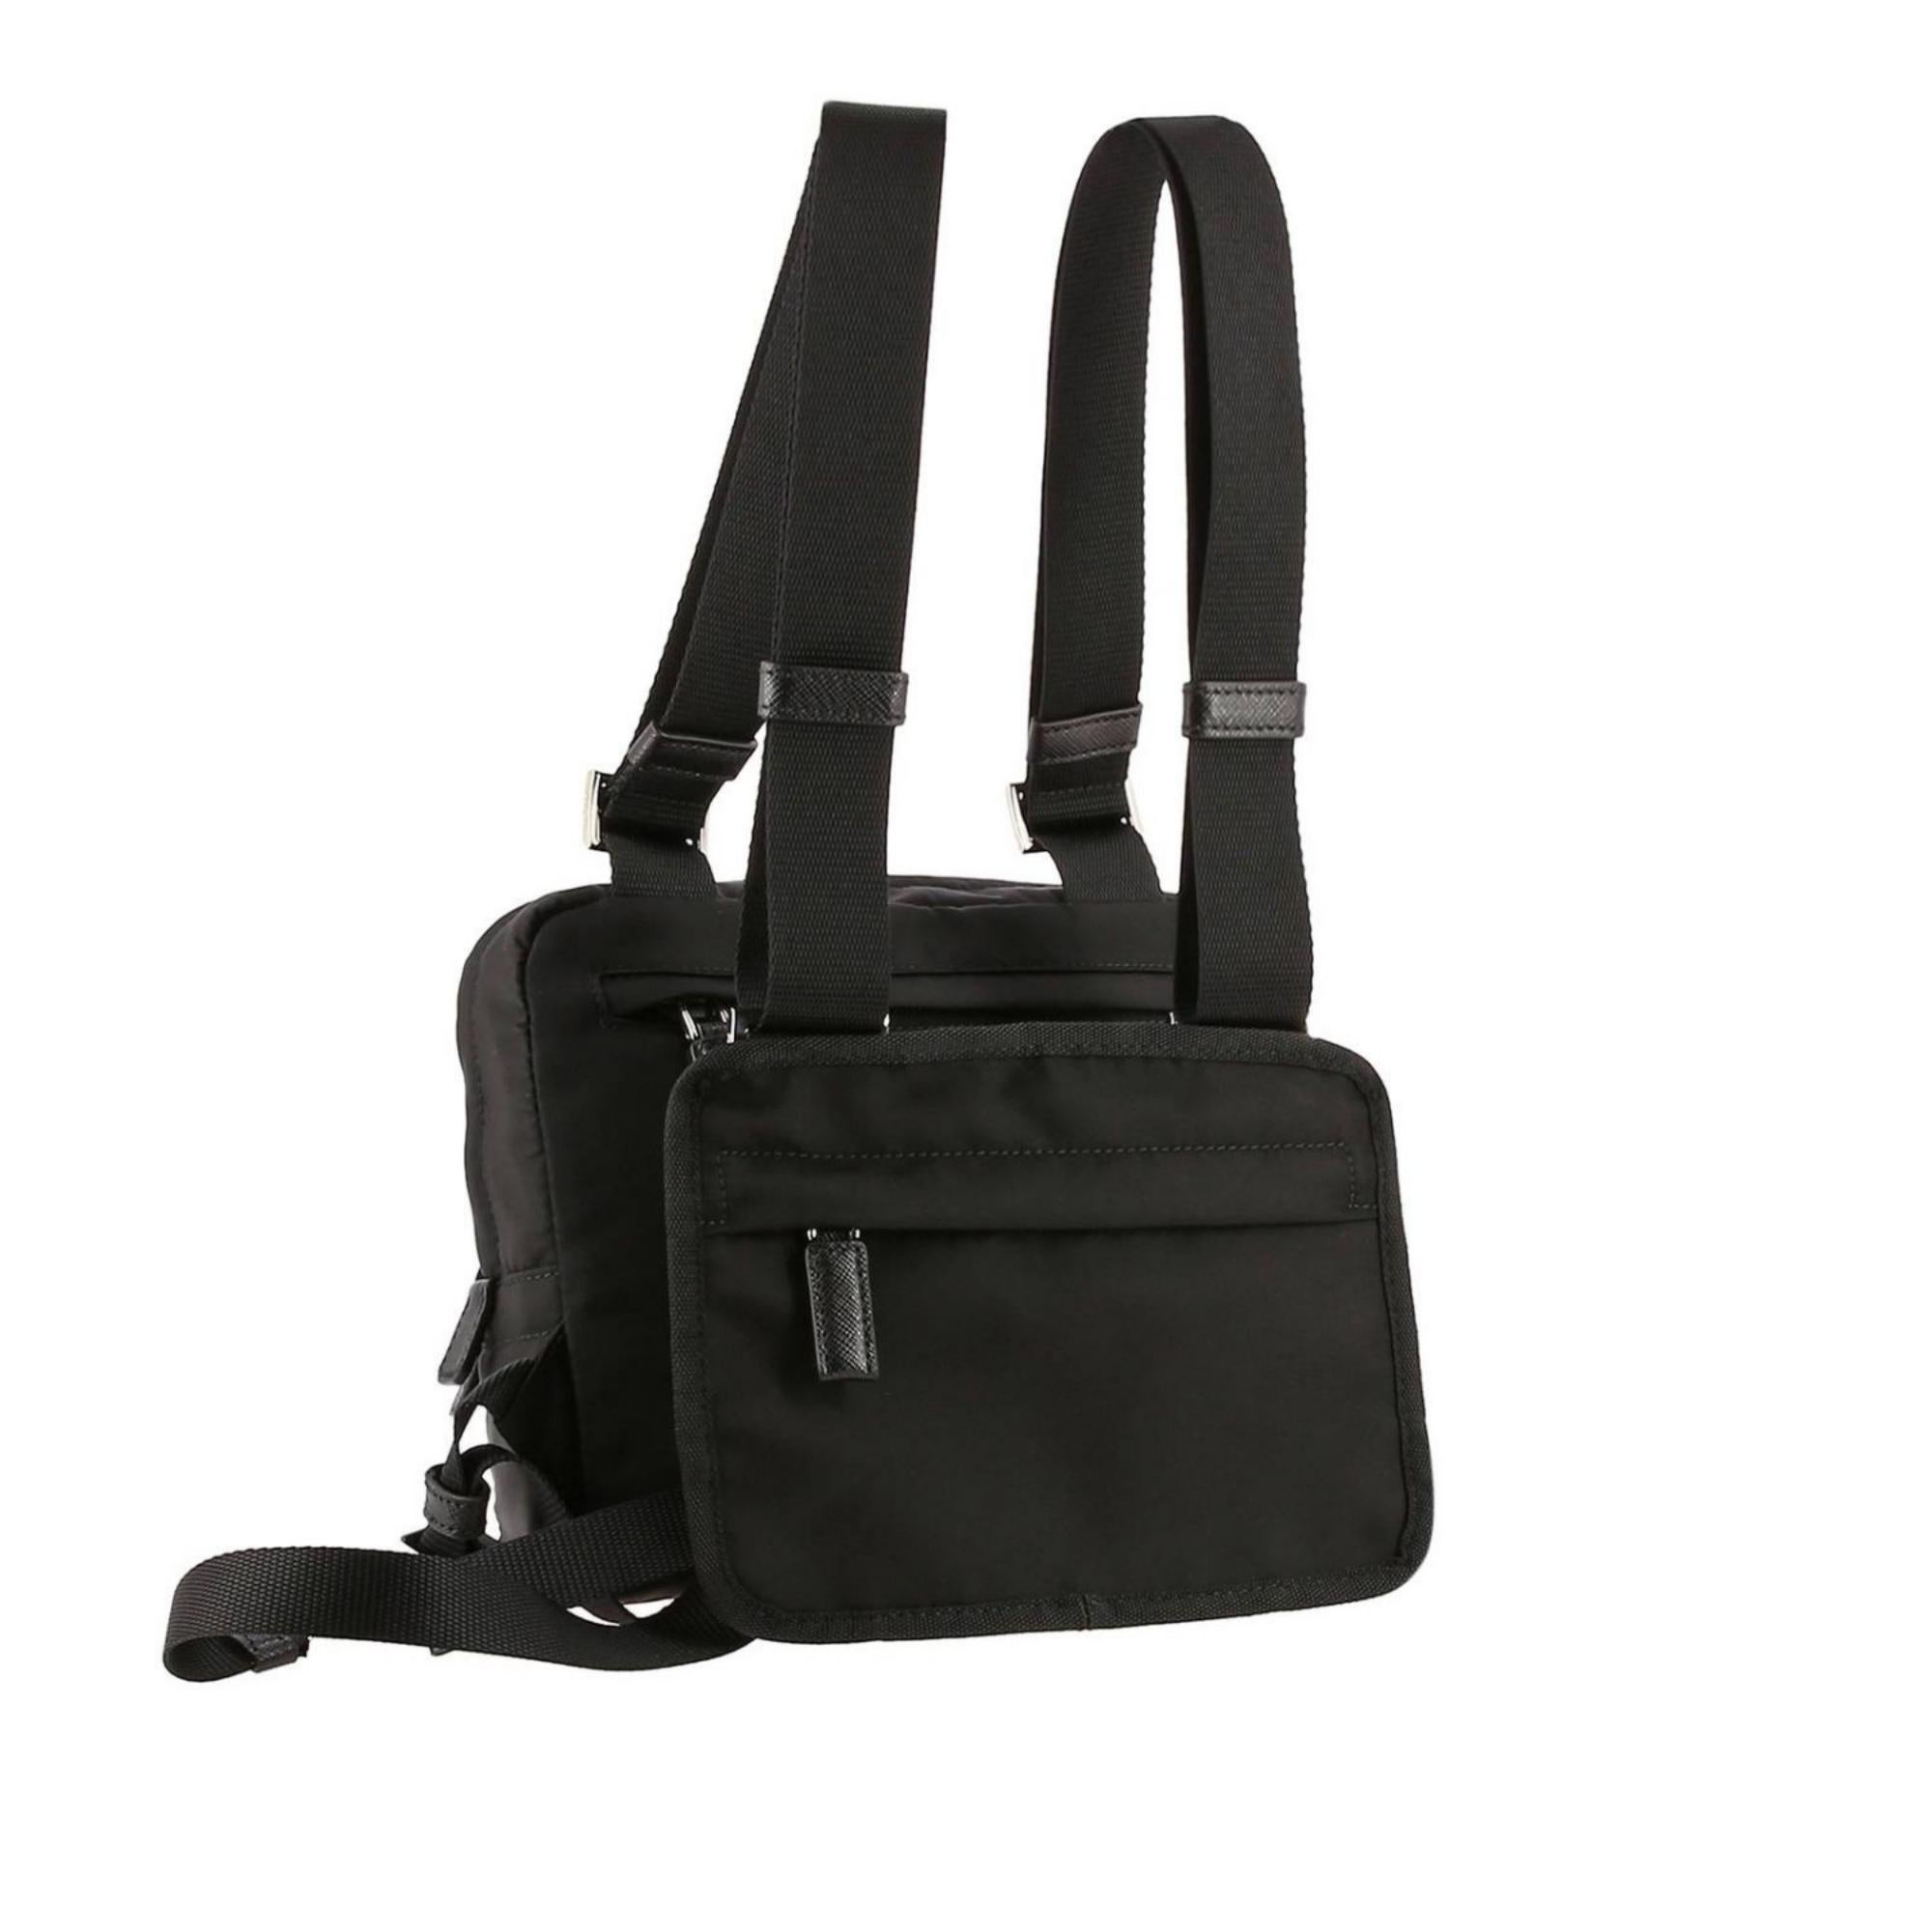 Prada nylon harness bag with saffiano details and adjustable shoulder straps with metallic buckles. It features front zip bag with zip compartment, zip pocket, inside zip pocket and nylon lining. Metal and enamel triangle, back pouch with zip.